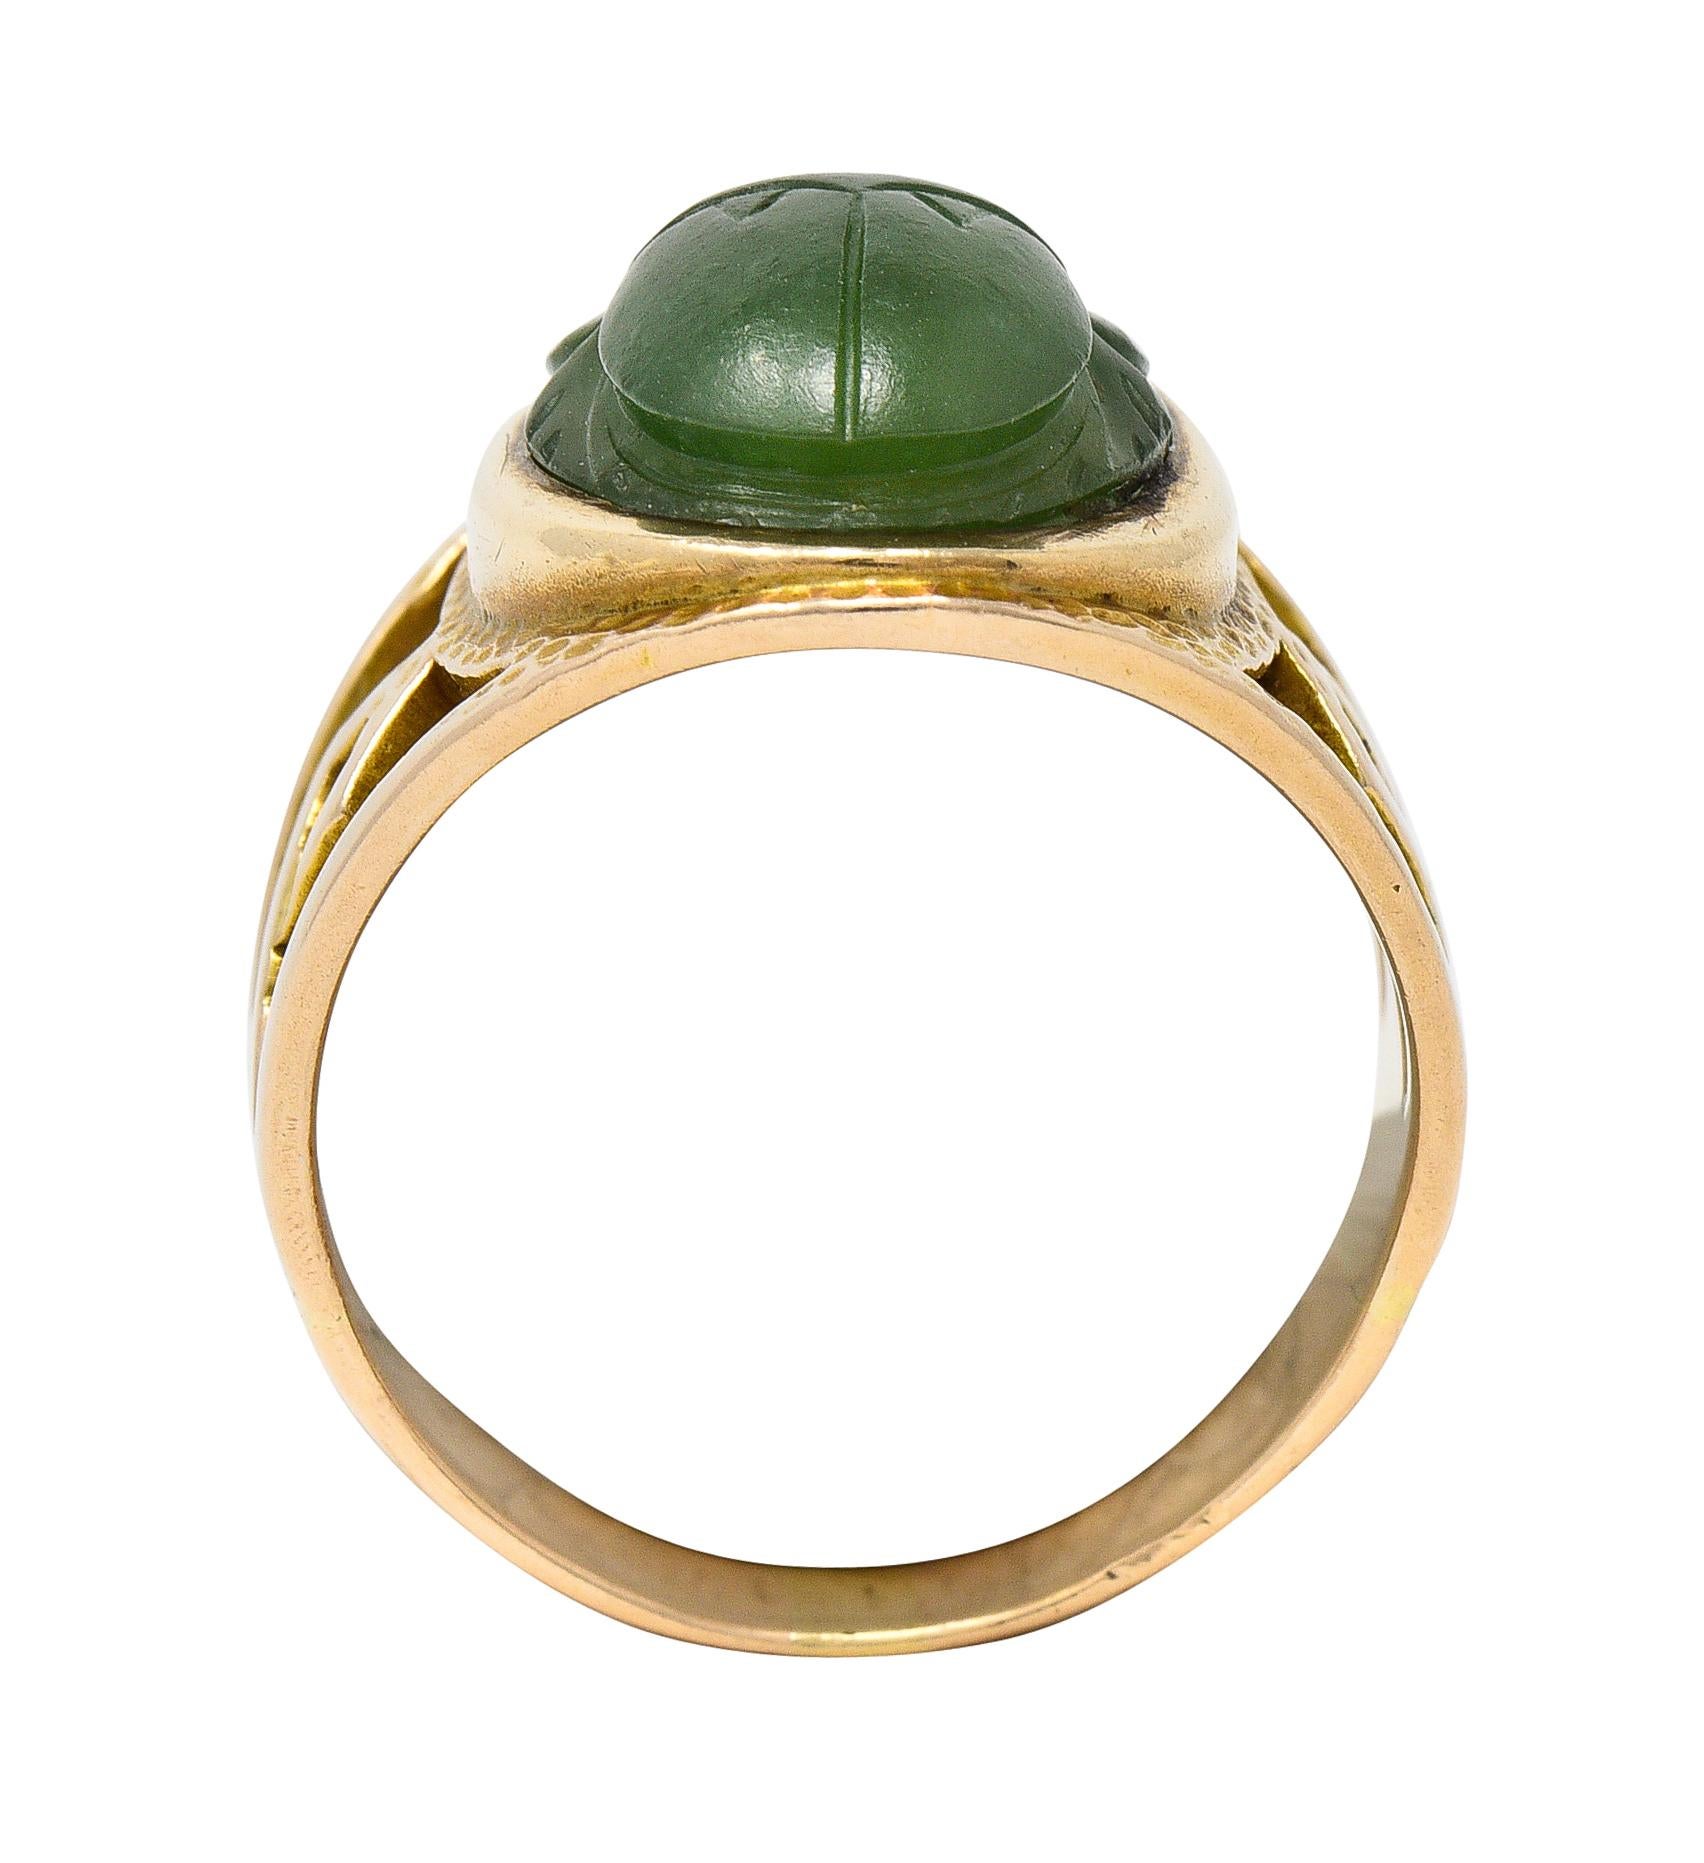 Victorian Egyptian Revival Carved Nephrite 14 Karat Gold Antique Scarab Ring 4